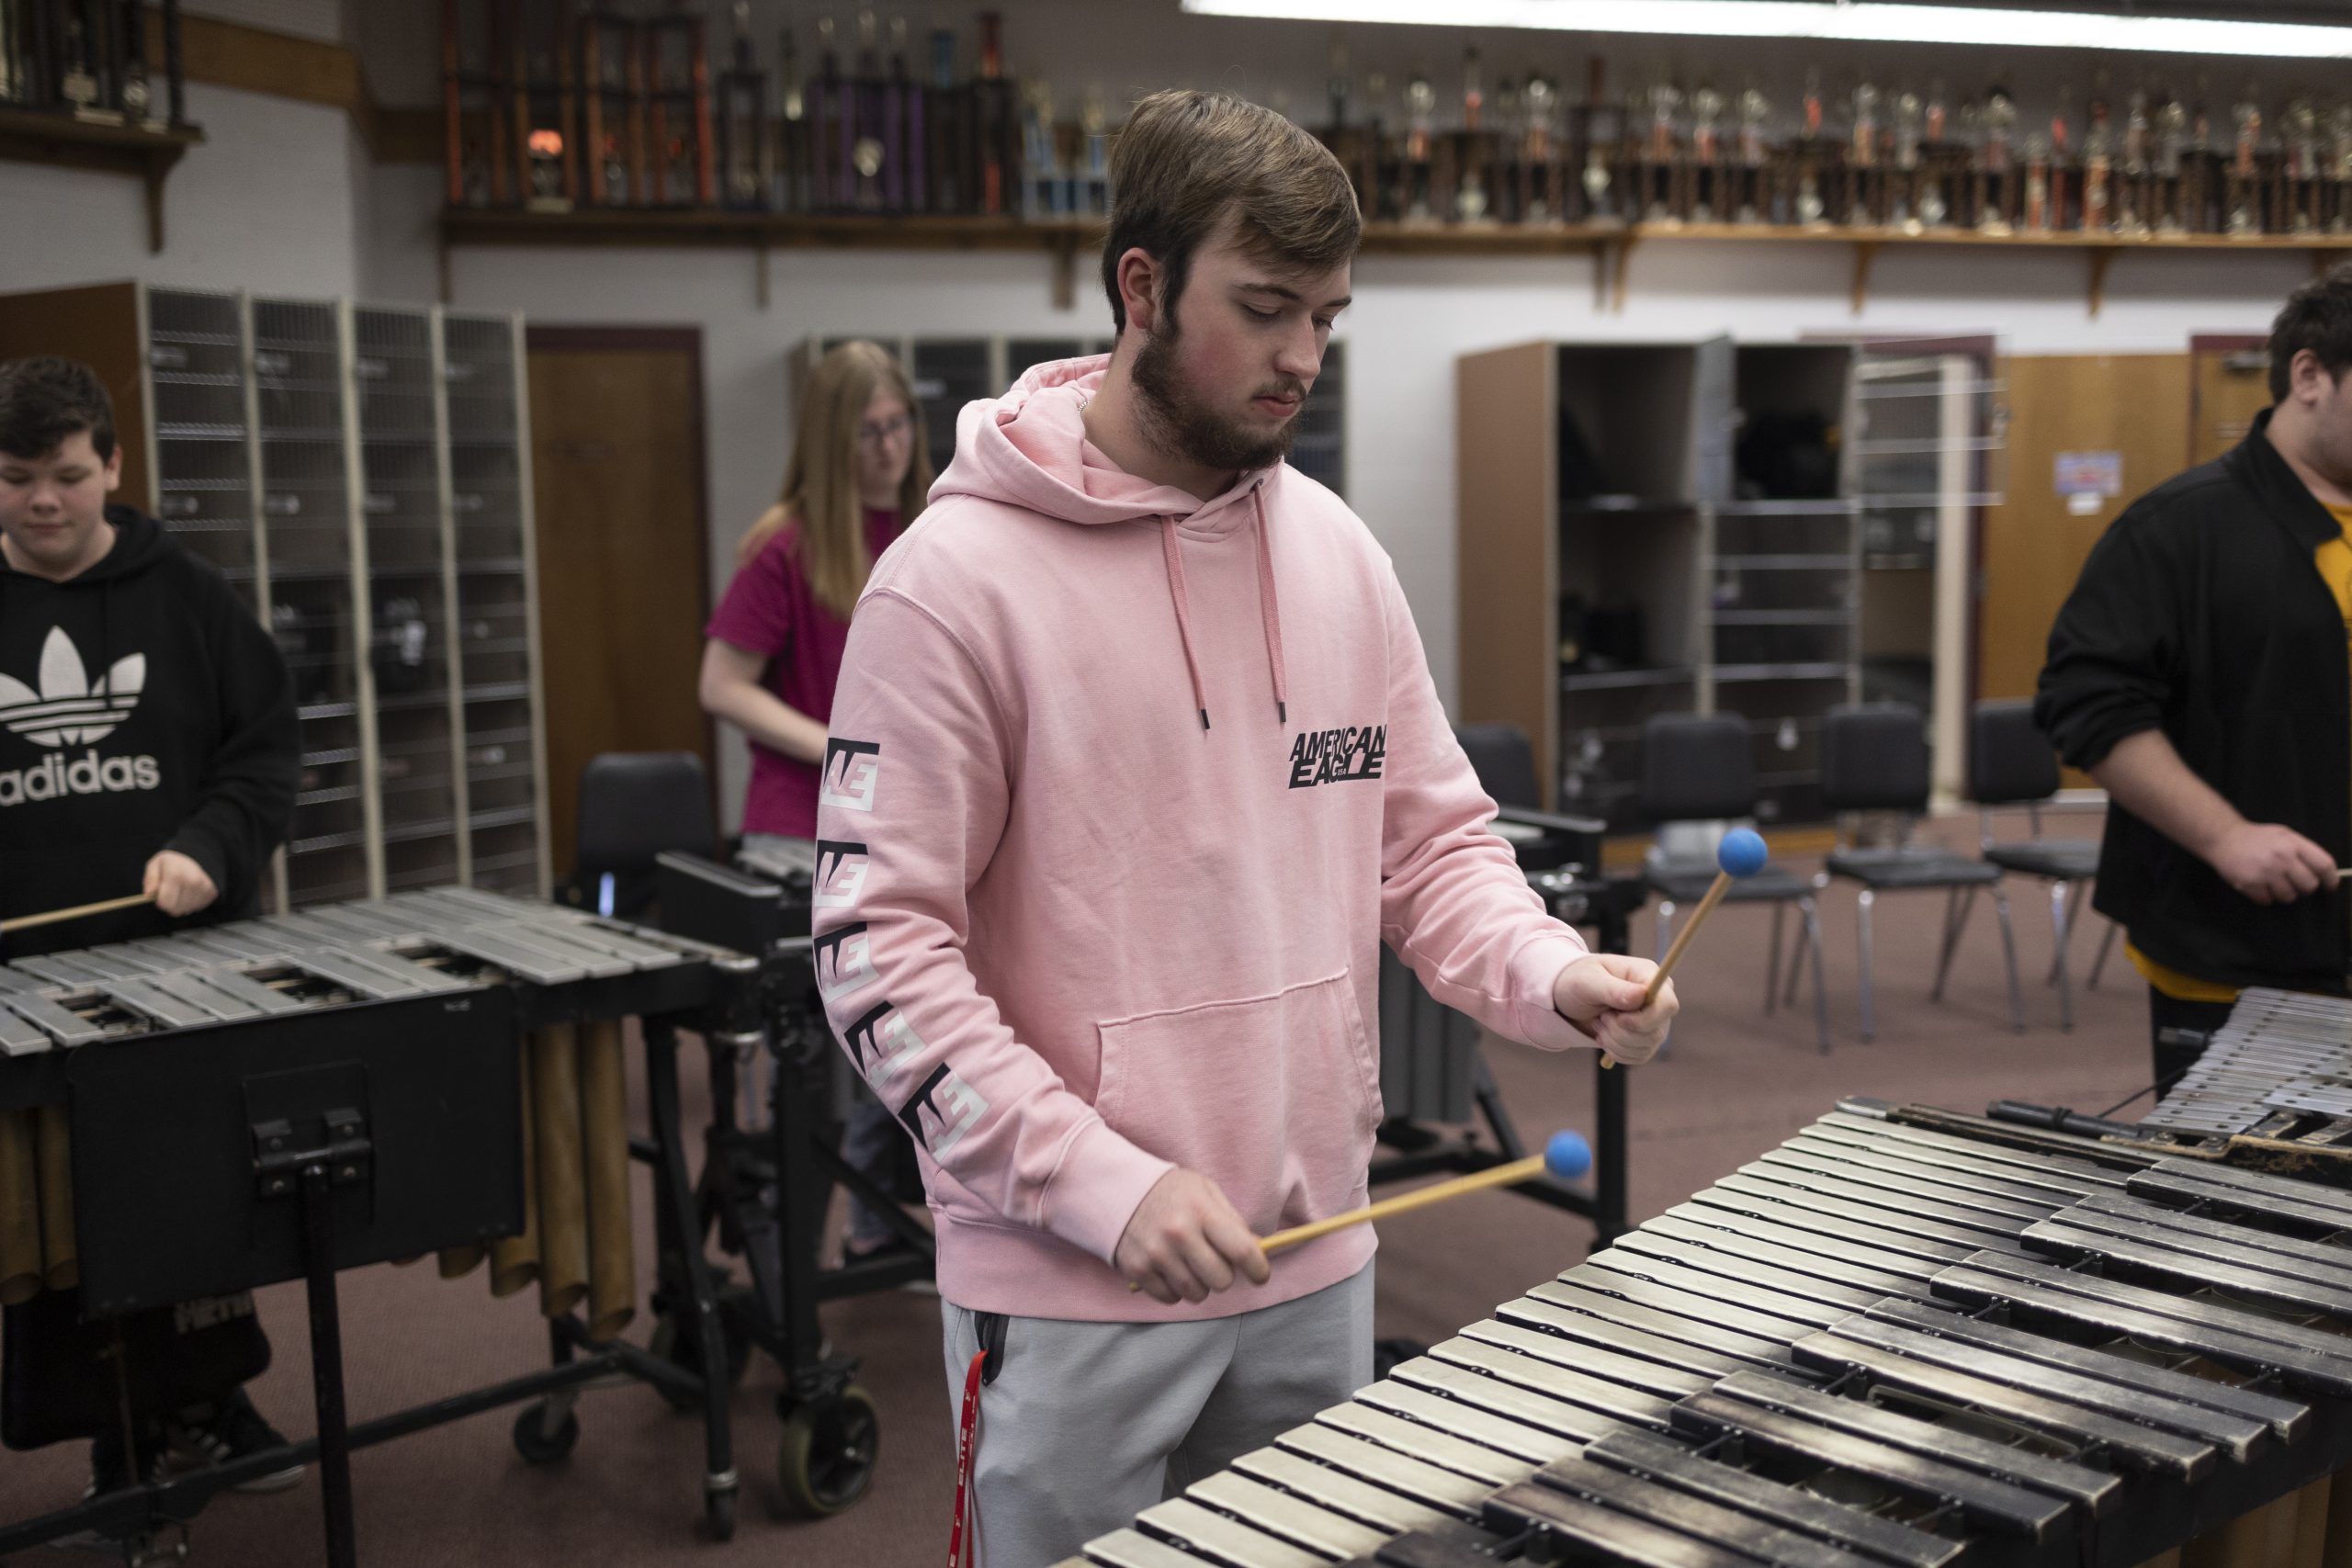 A student practices mallets in the band room.